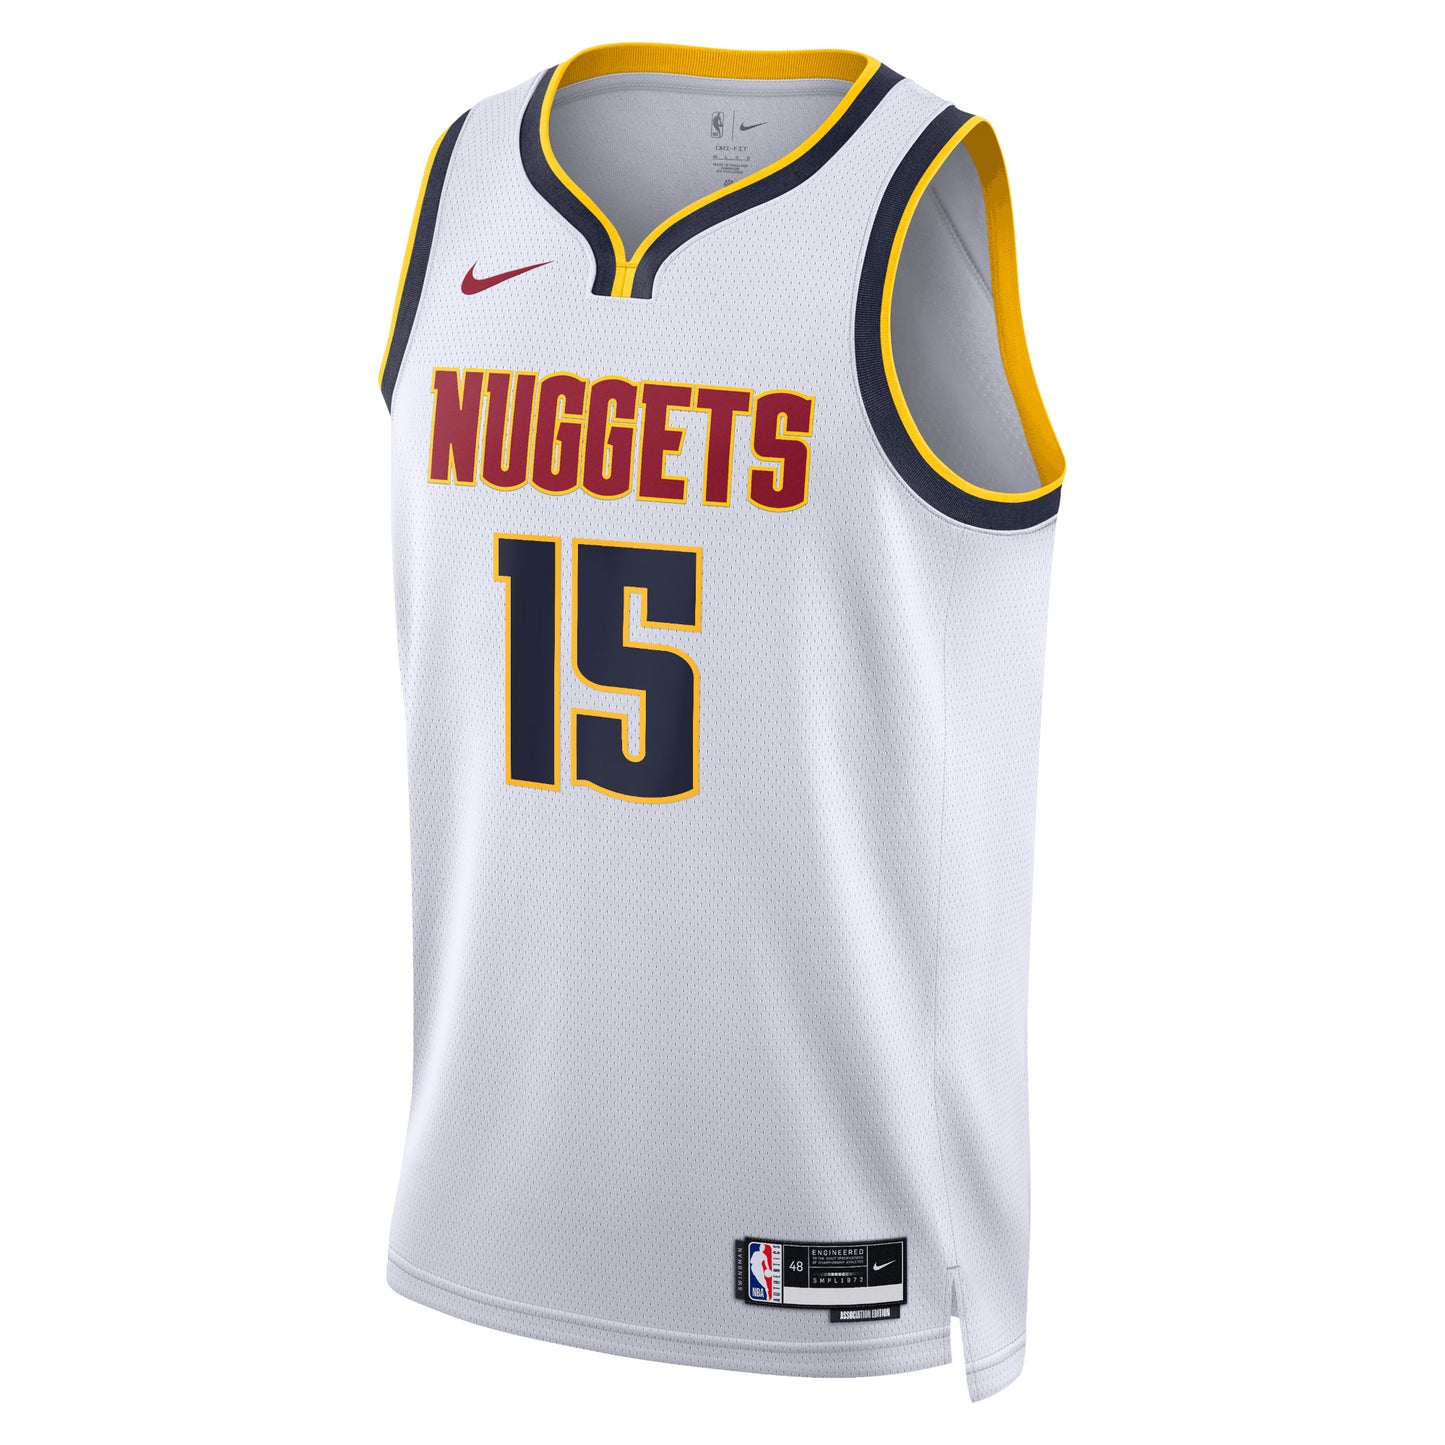 Denver Nuggets - The icon jersey features some key details.